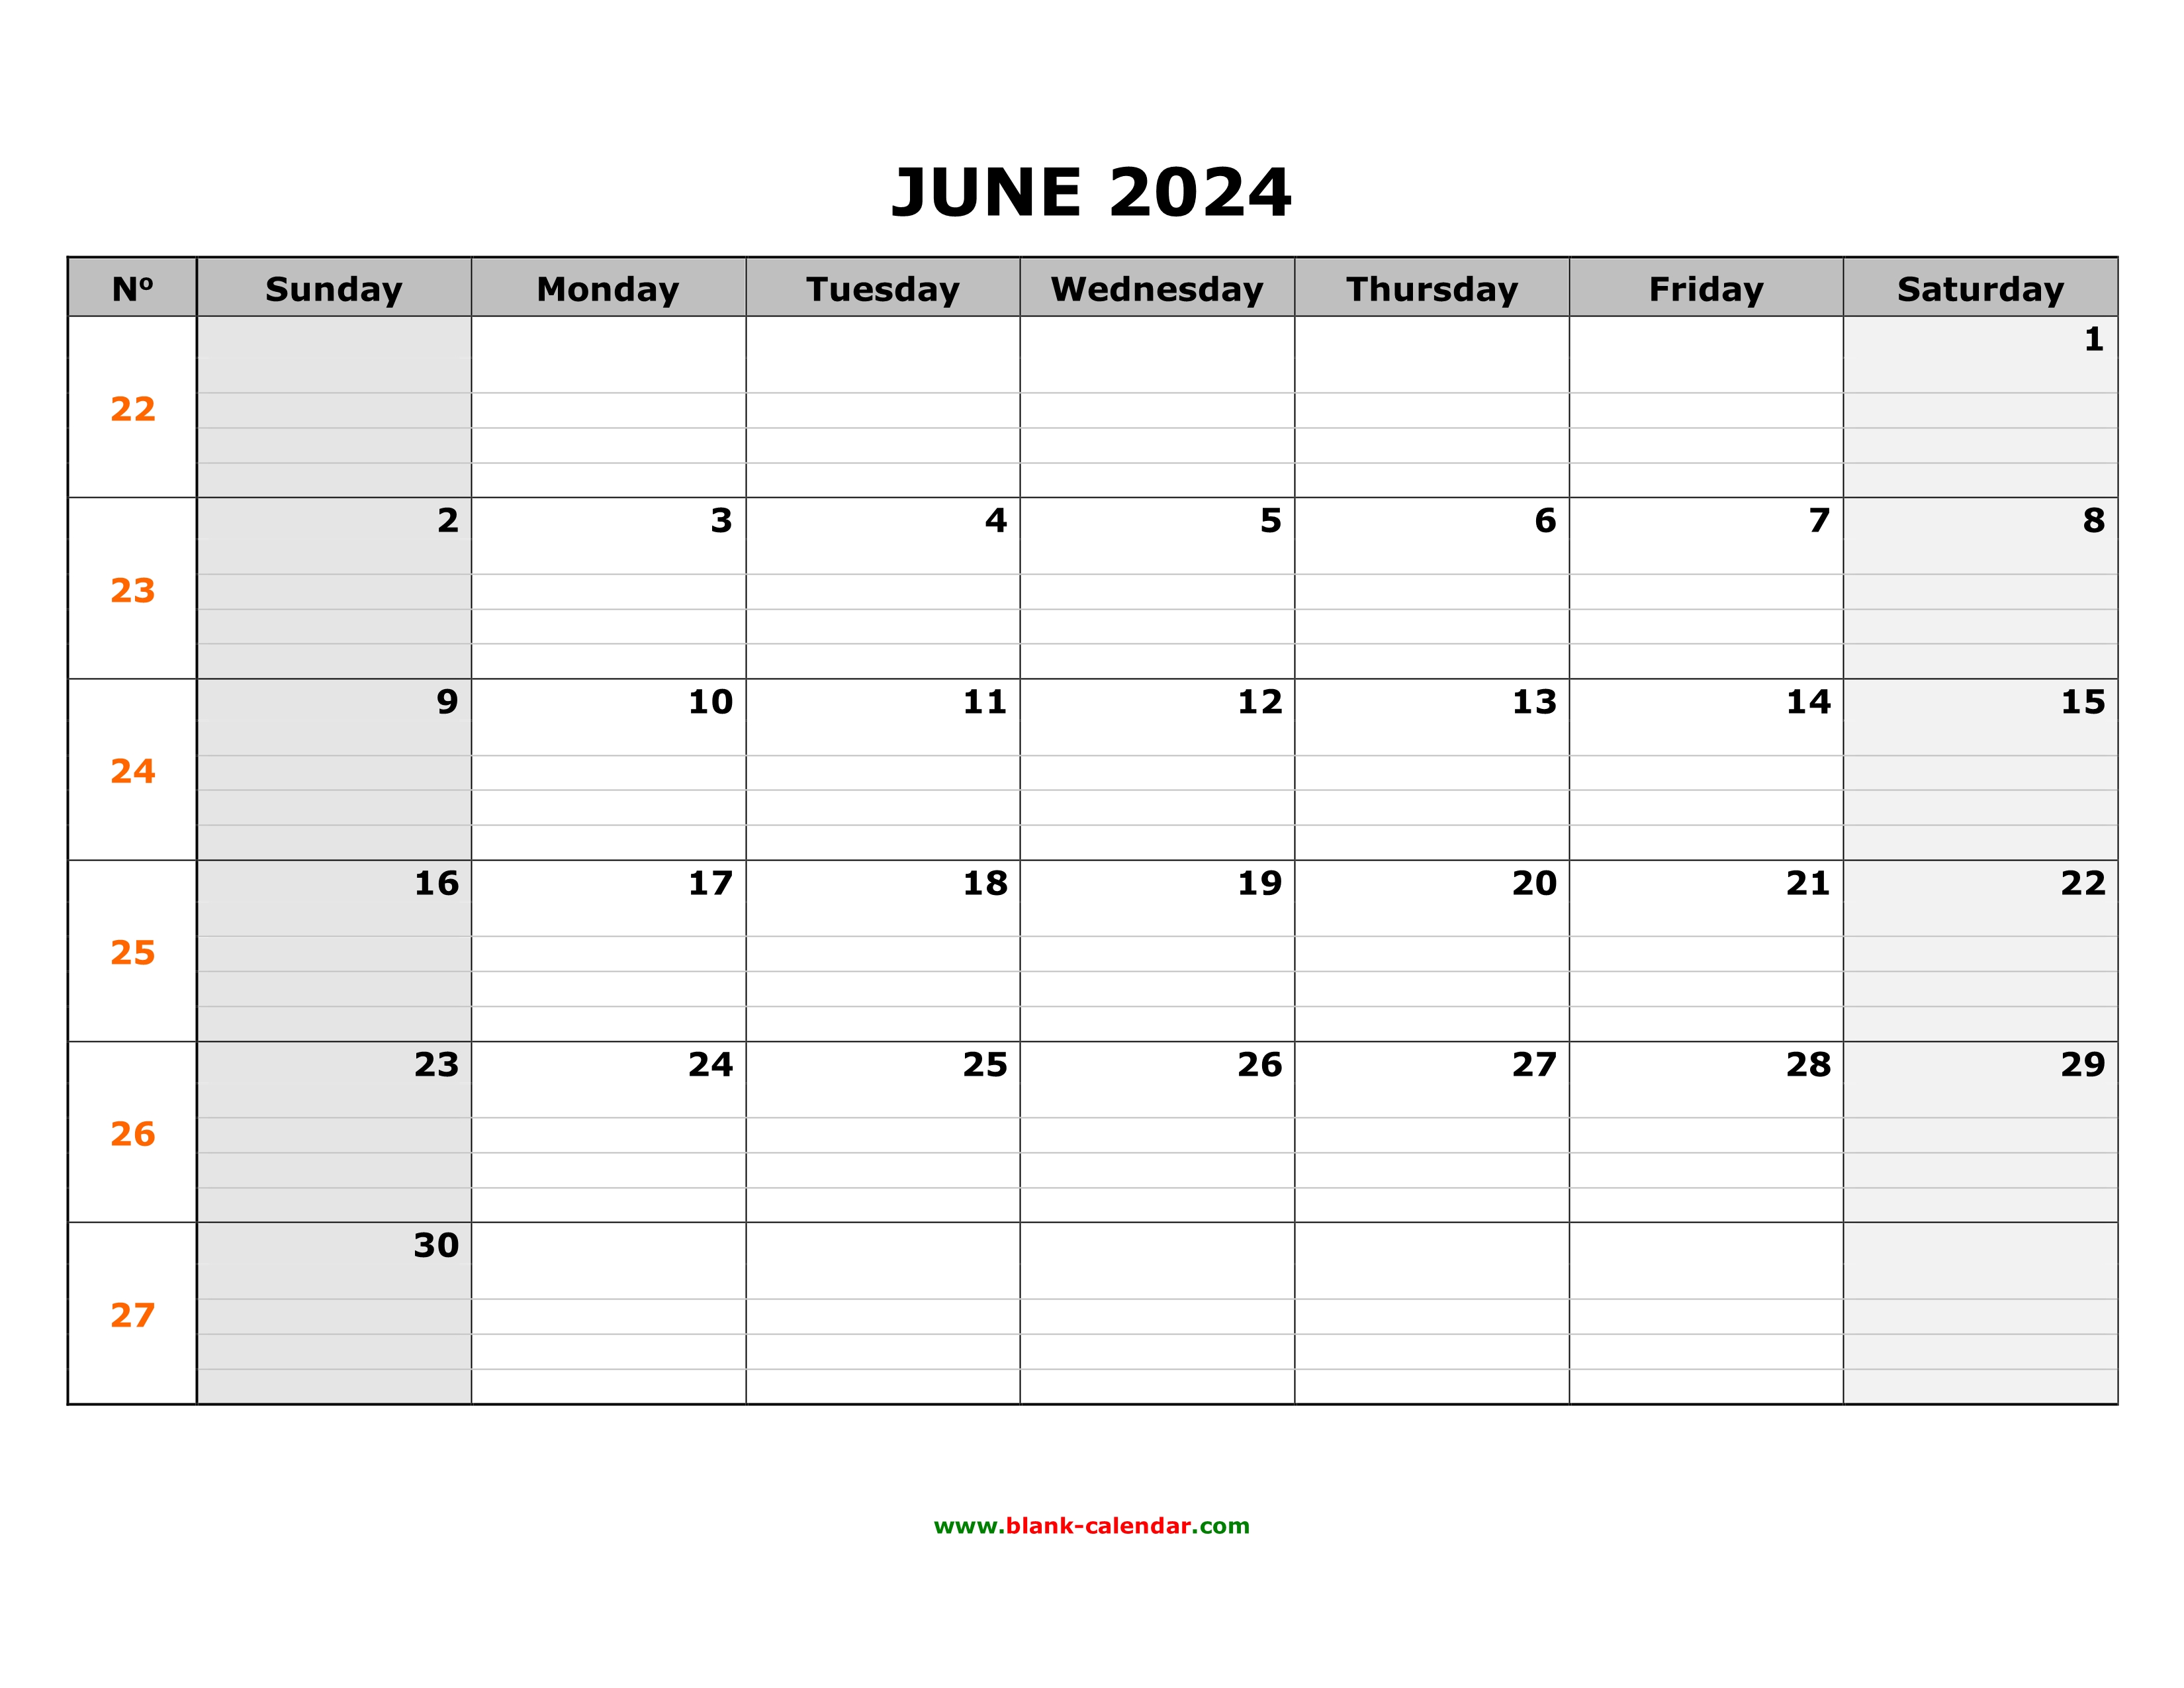 Free Download Printable June 2024 Calendar, large box grid, space for notes